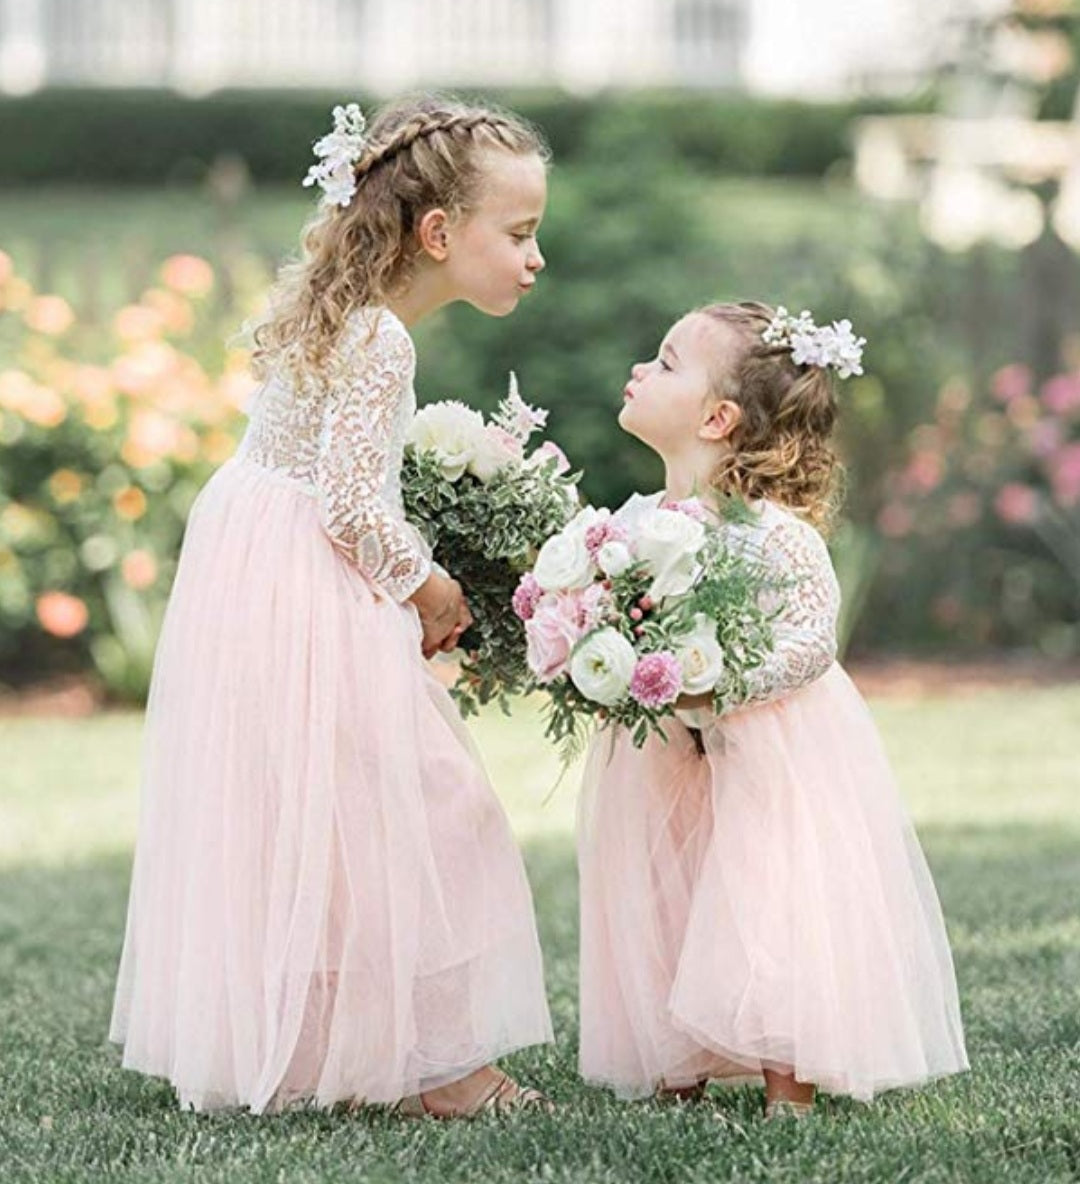 Blush flower girl dress with ivory lace ...